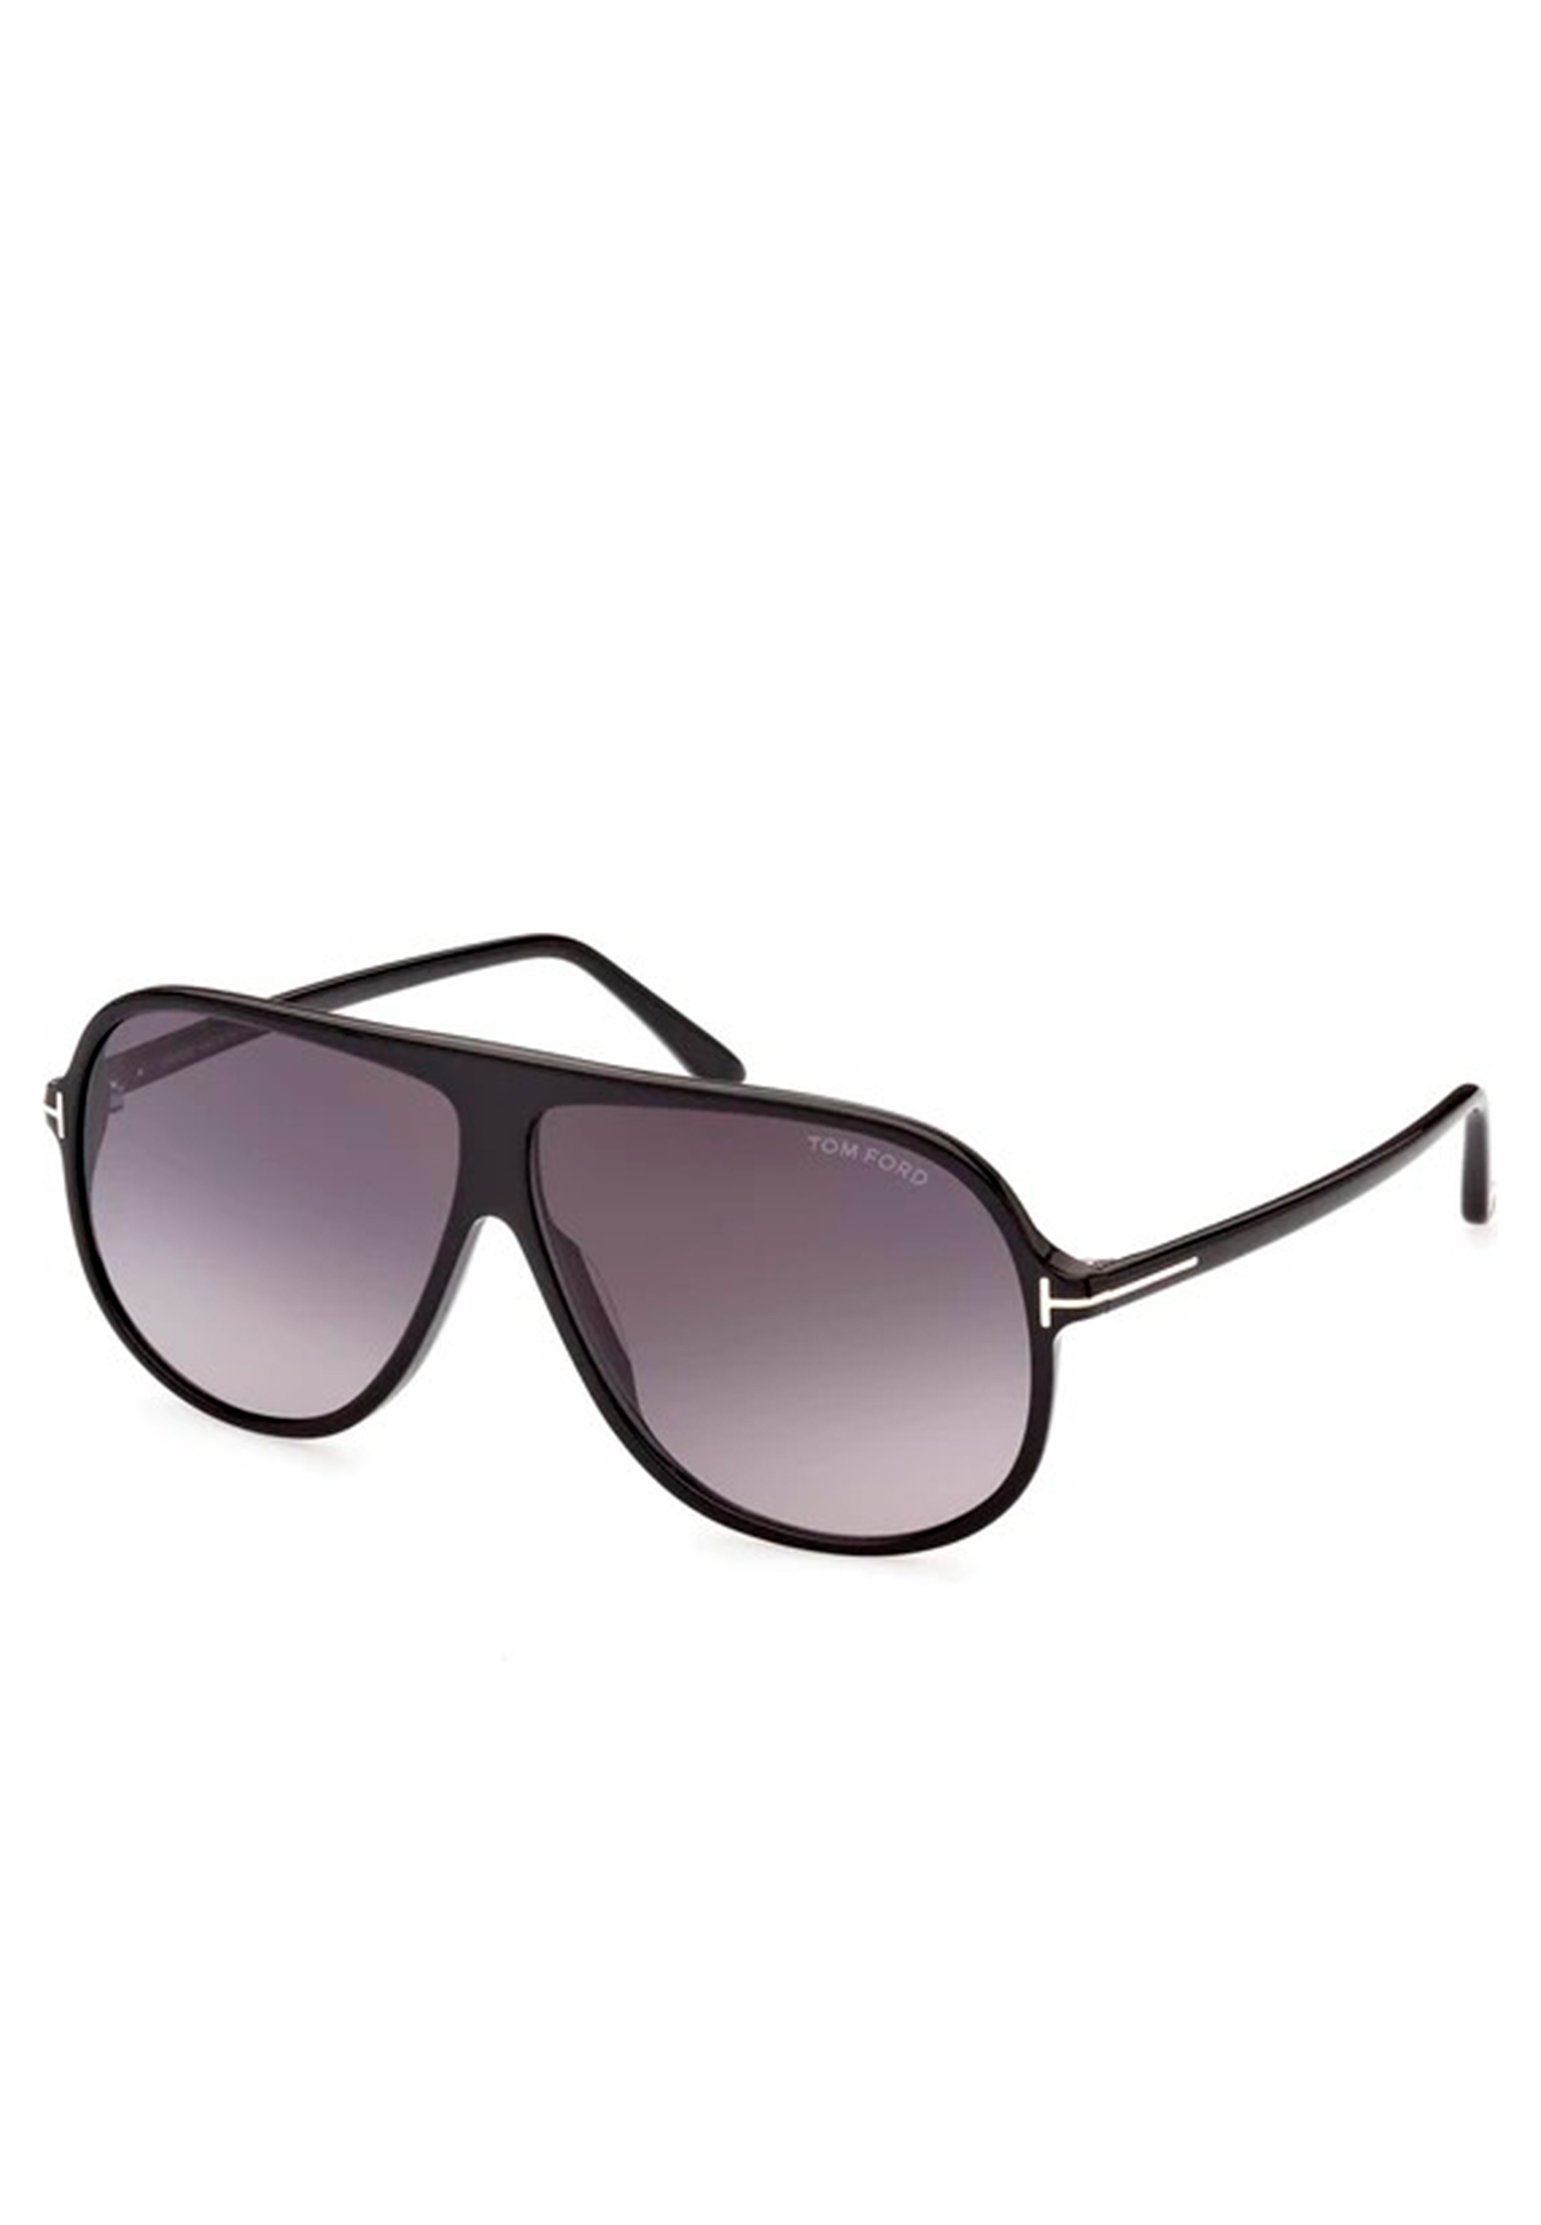 Sunglass TOM FORD Color: black (Code: 1660) in online store Allure